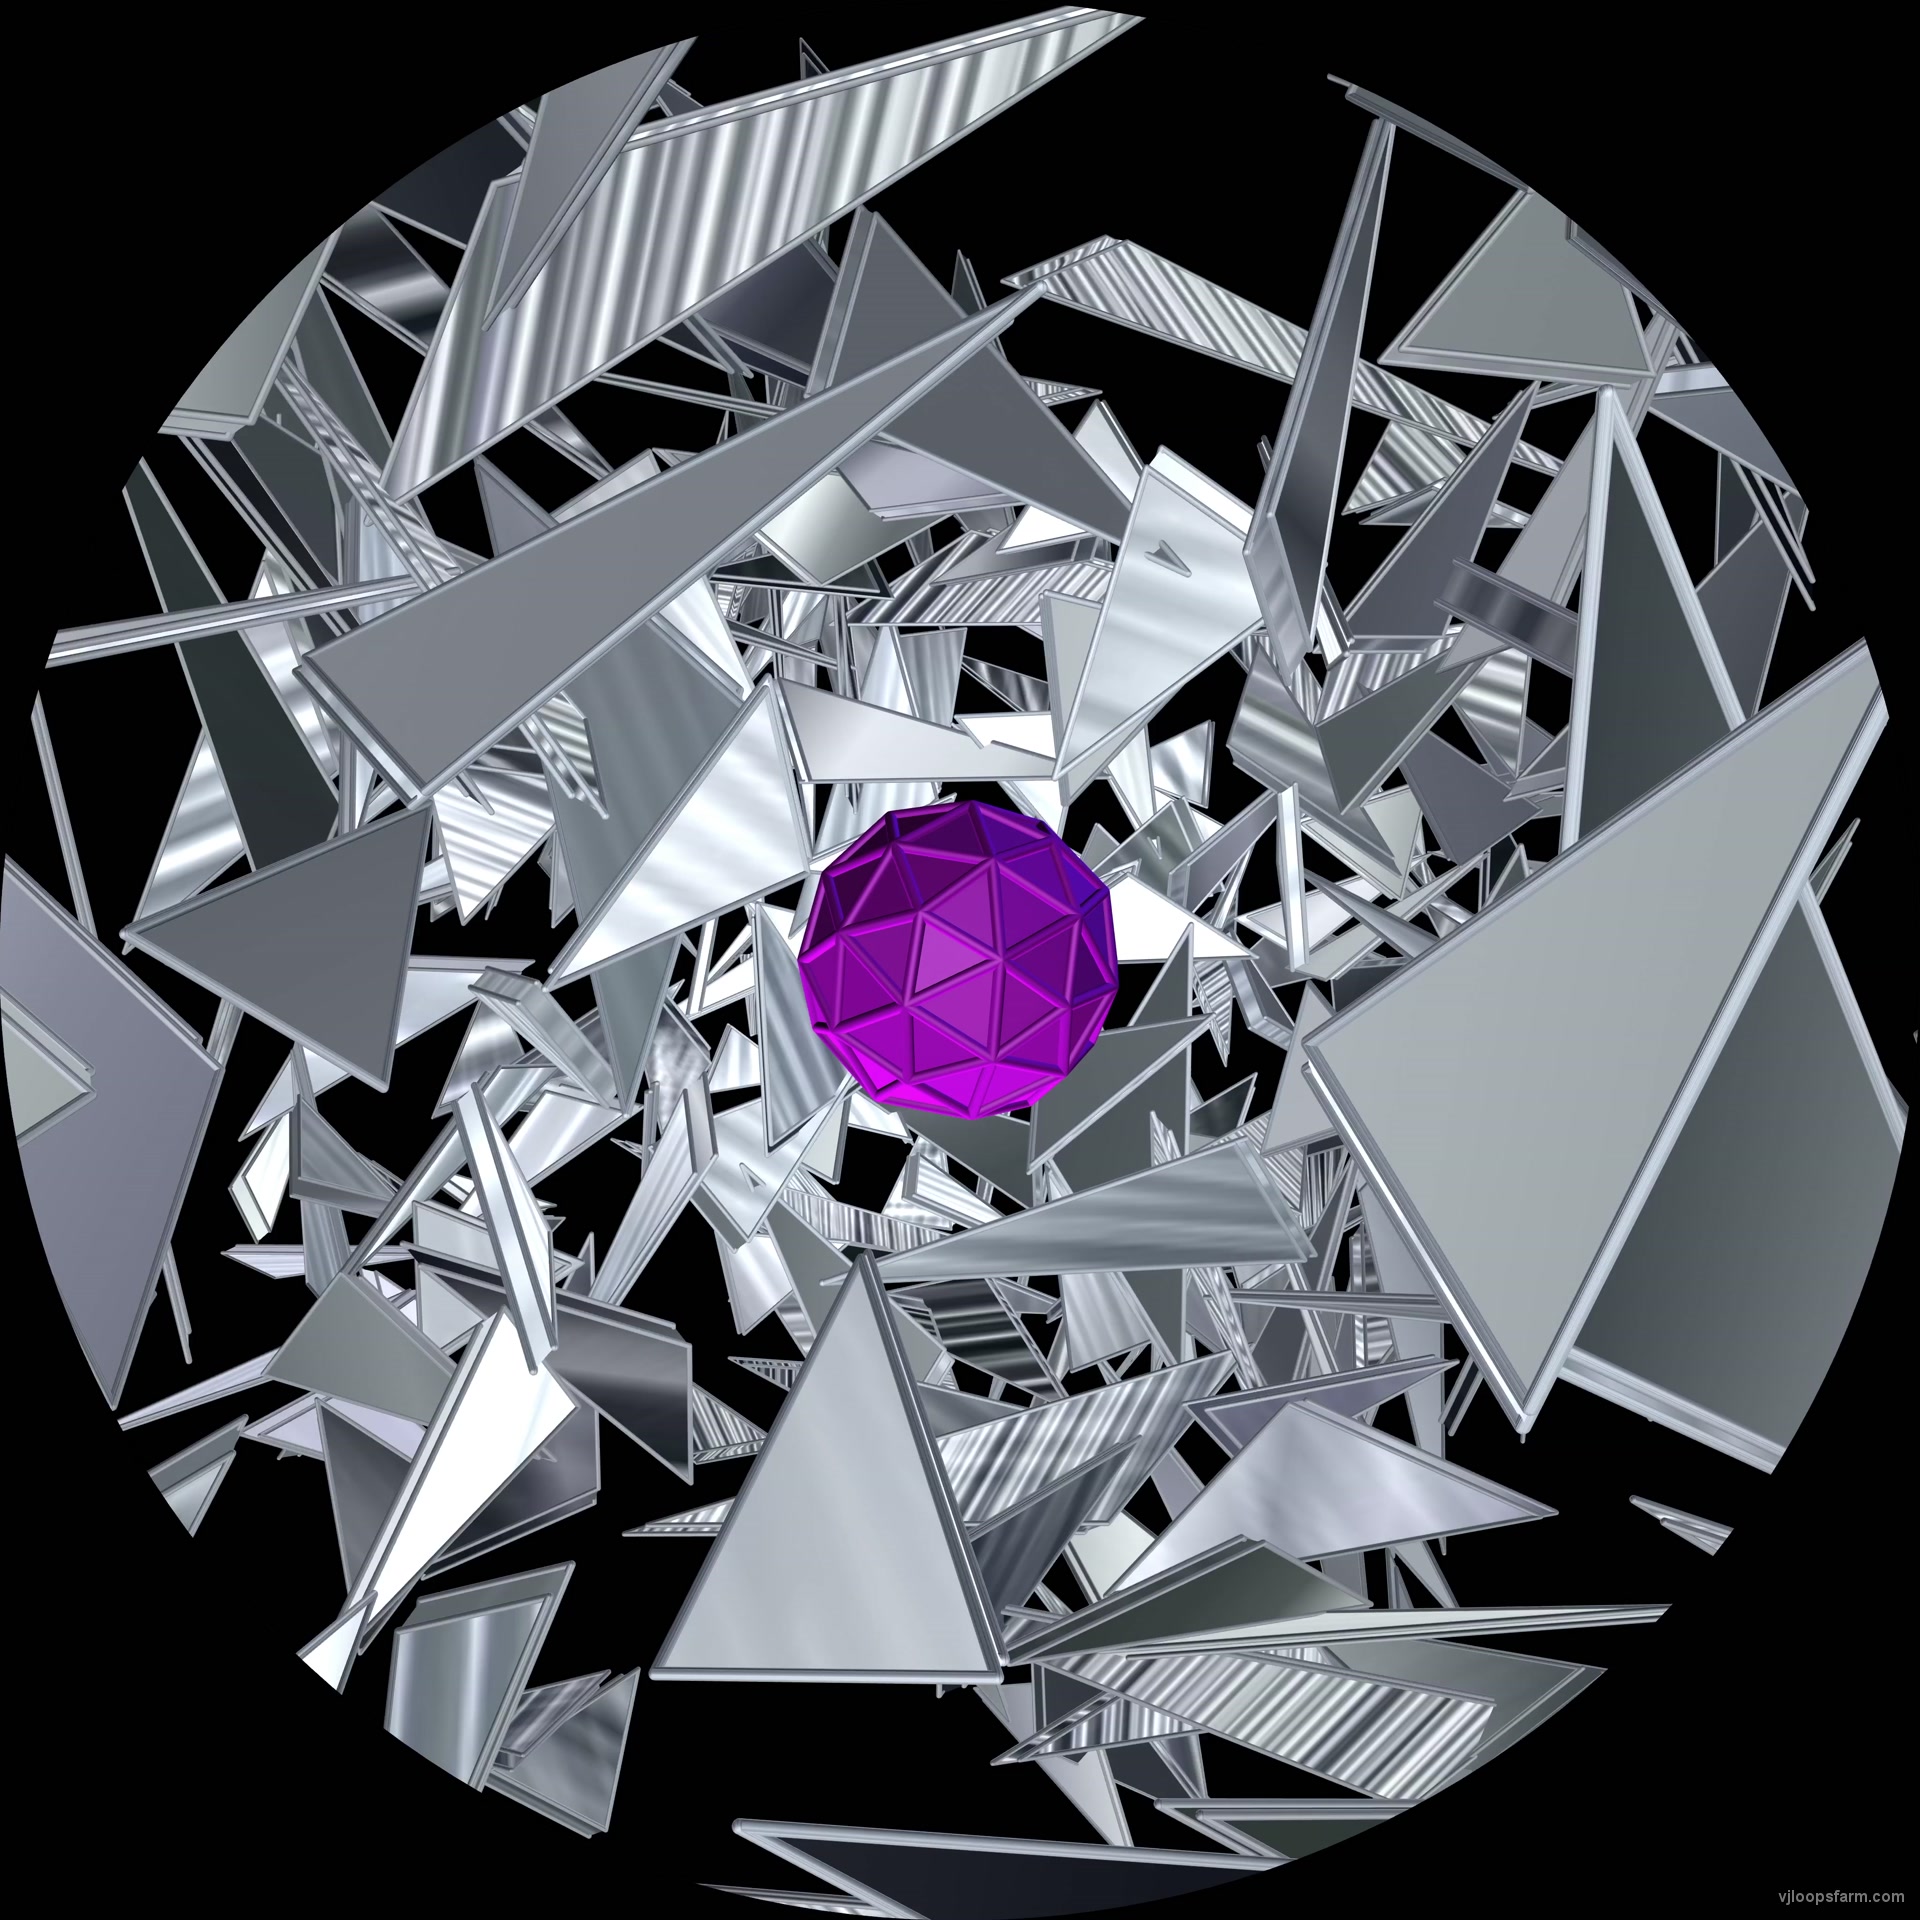 Pink Heart of Silver Triangle Blizzard by VJkET 4K Fulldome VJ Loop